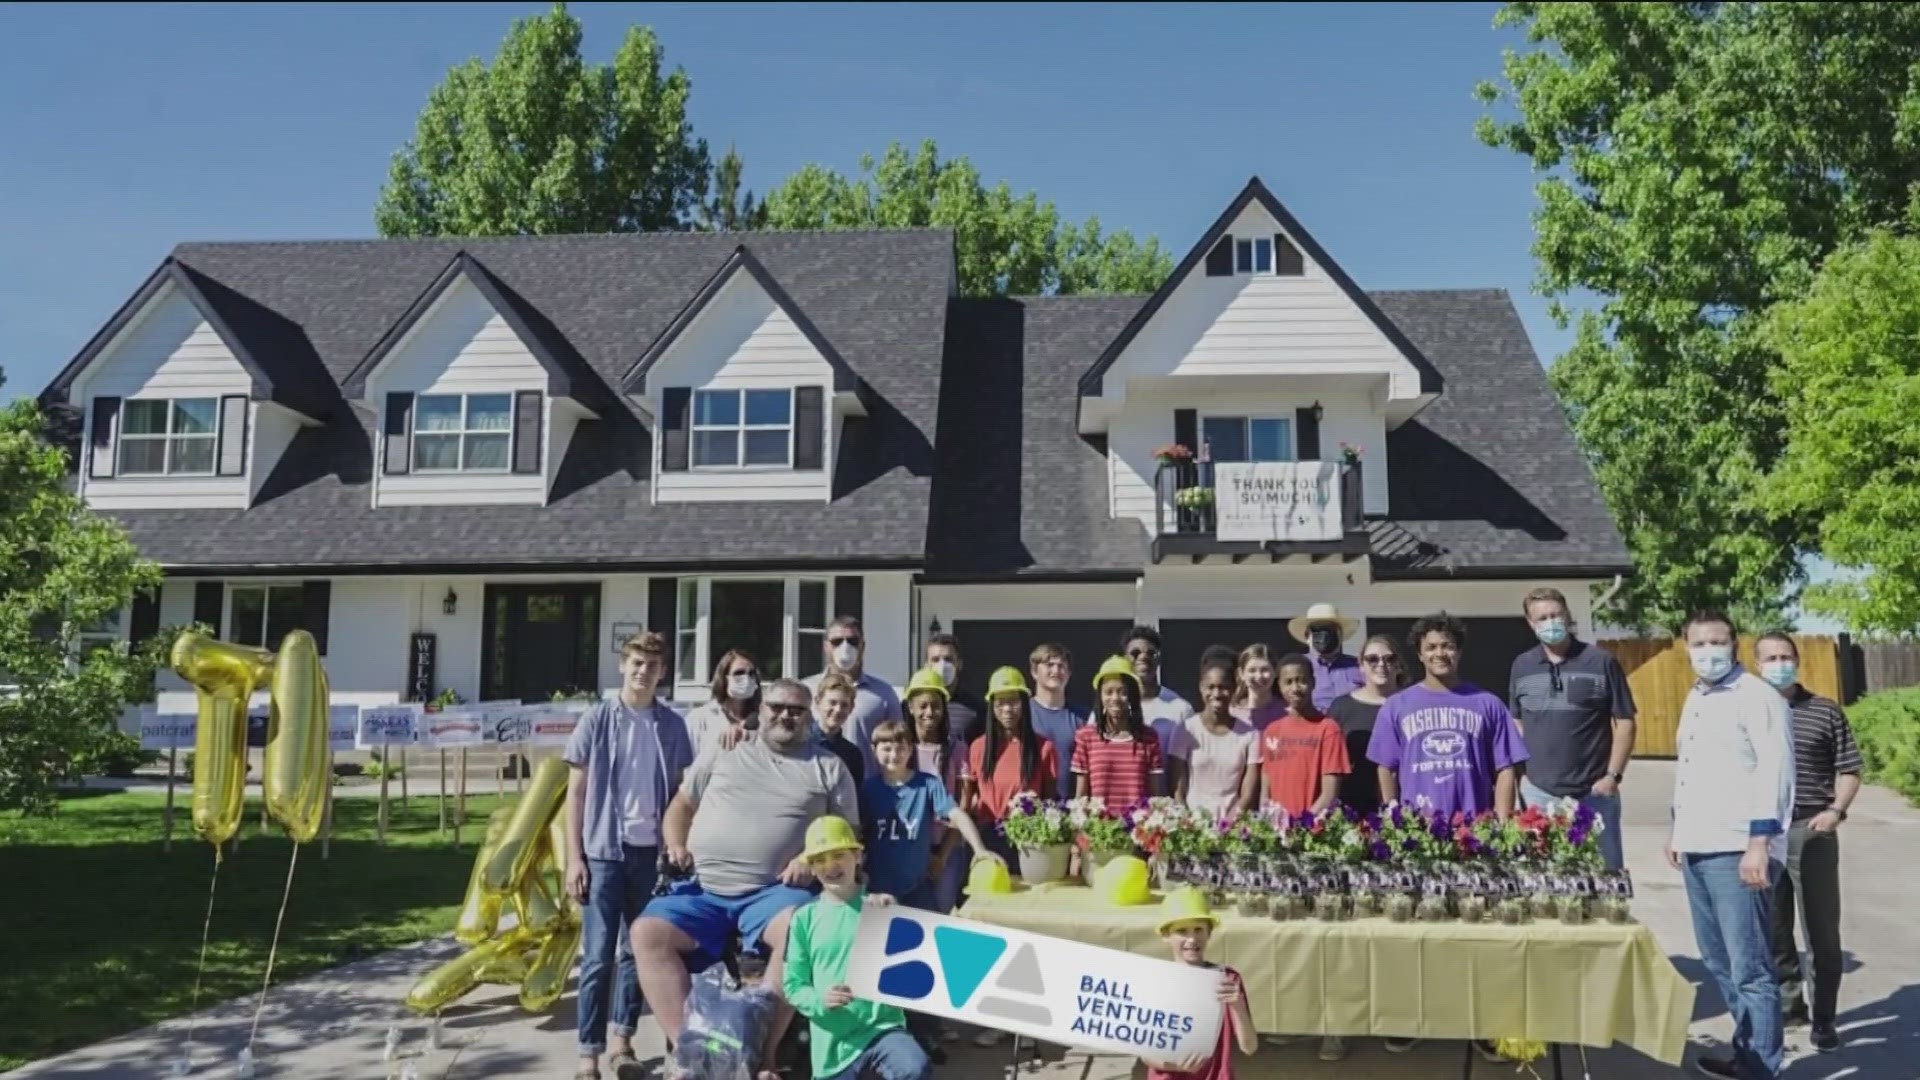 For KTVB's 16th annual 7Cares Idaho Shares campaign, Ball Ventures Ahlquist is showing support for Idahoans in need as a featured Company that Cares.